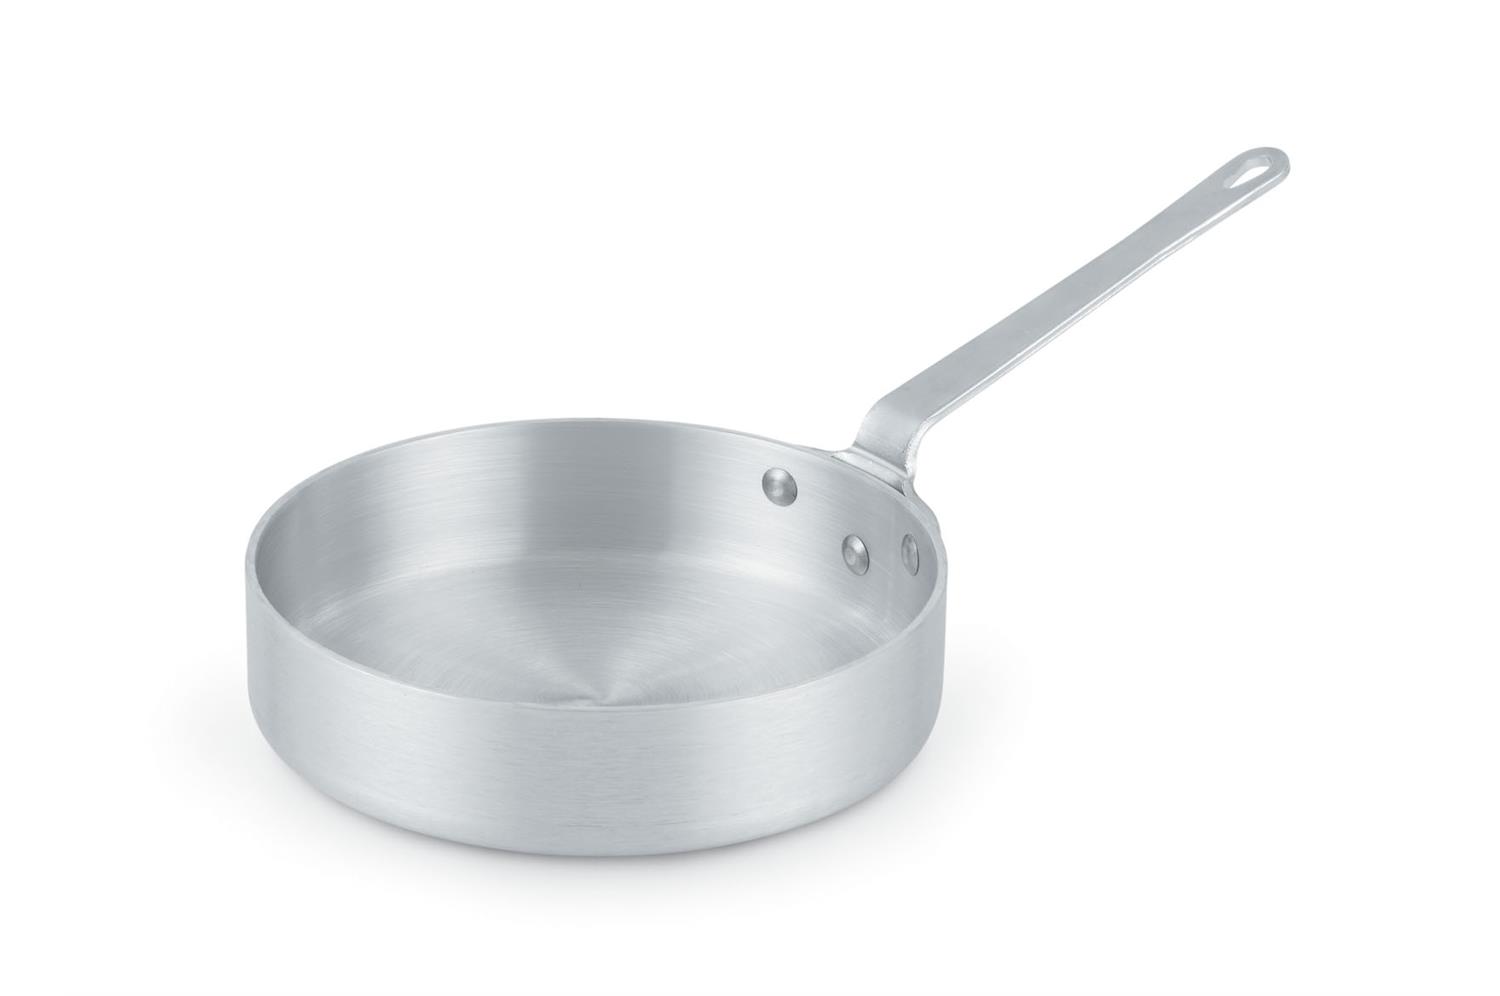 Vollrath 67437 Wear-Ever Aluminum Saute Pan with Traditional Handle